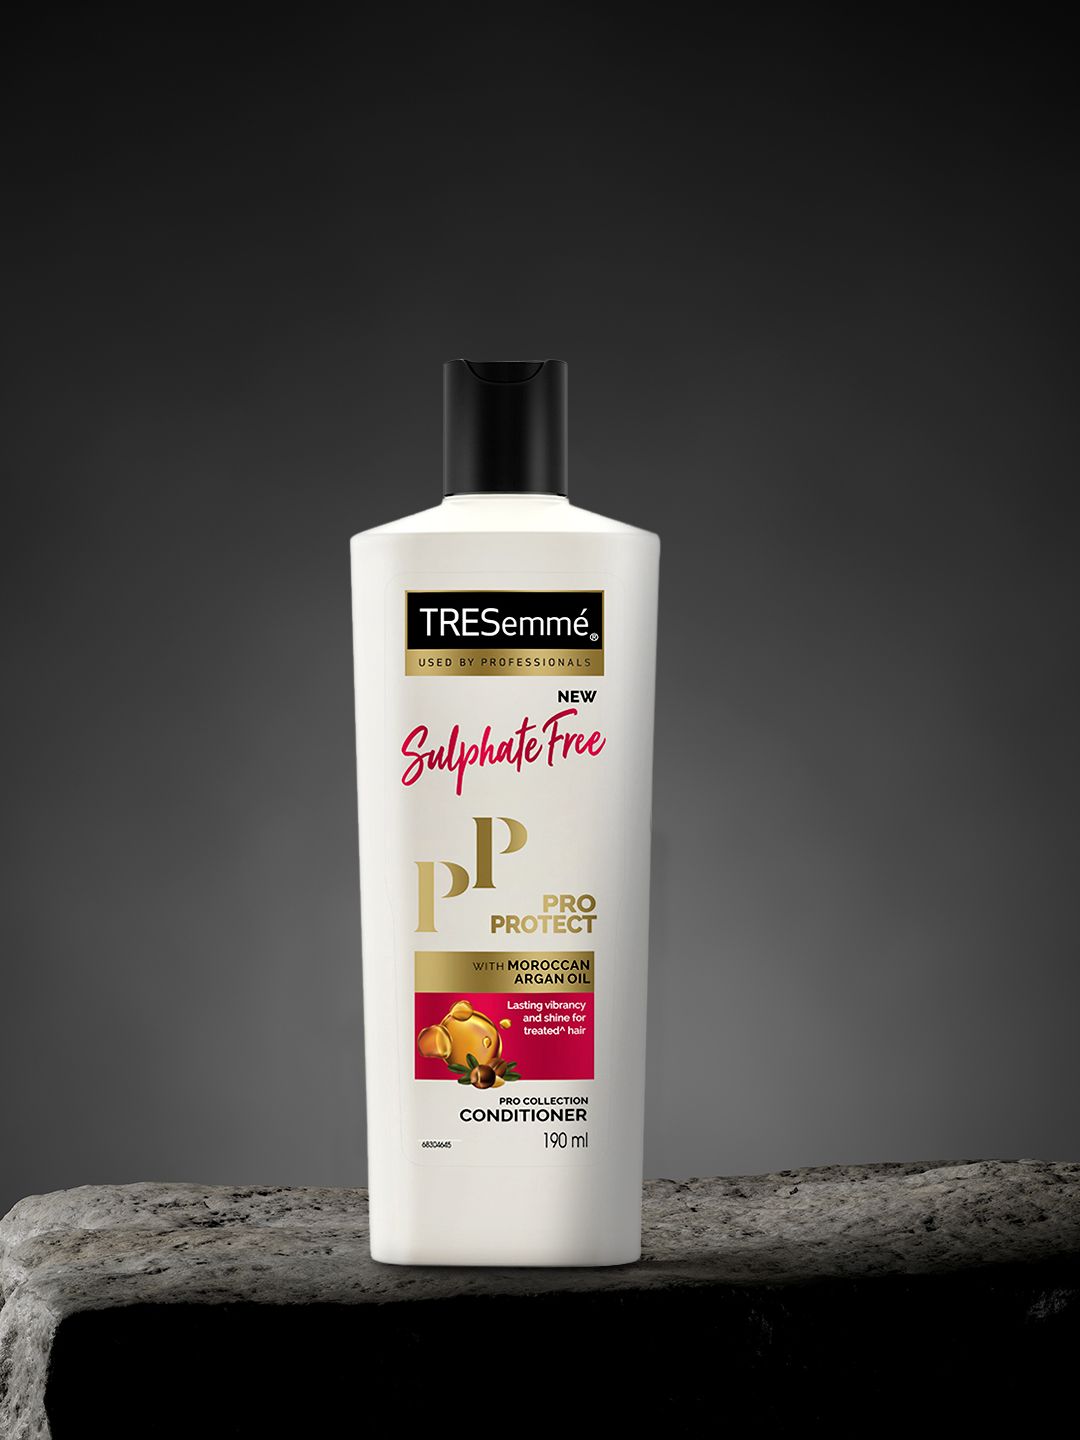 TRESemme Pro Protect Sulphate Free Conditioner 190 ml Price in India